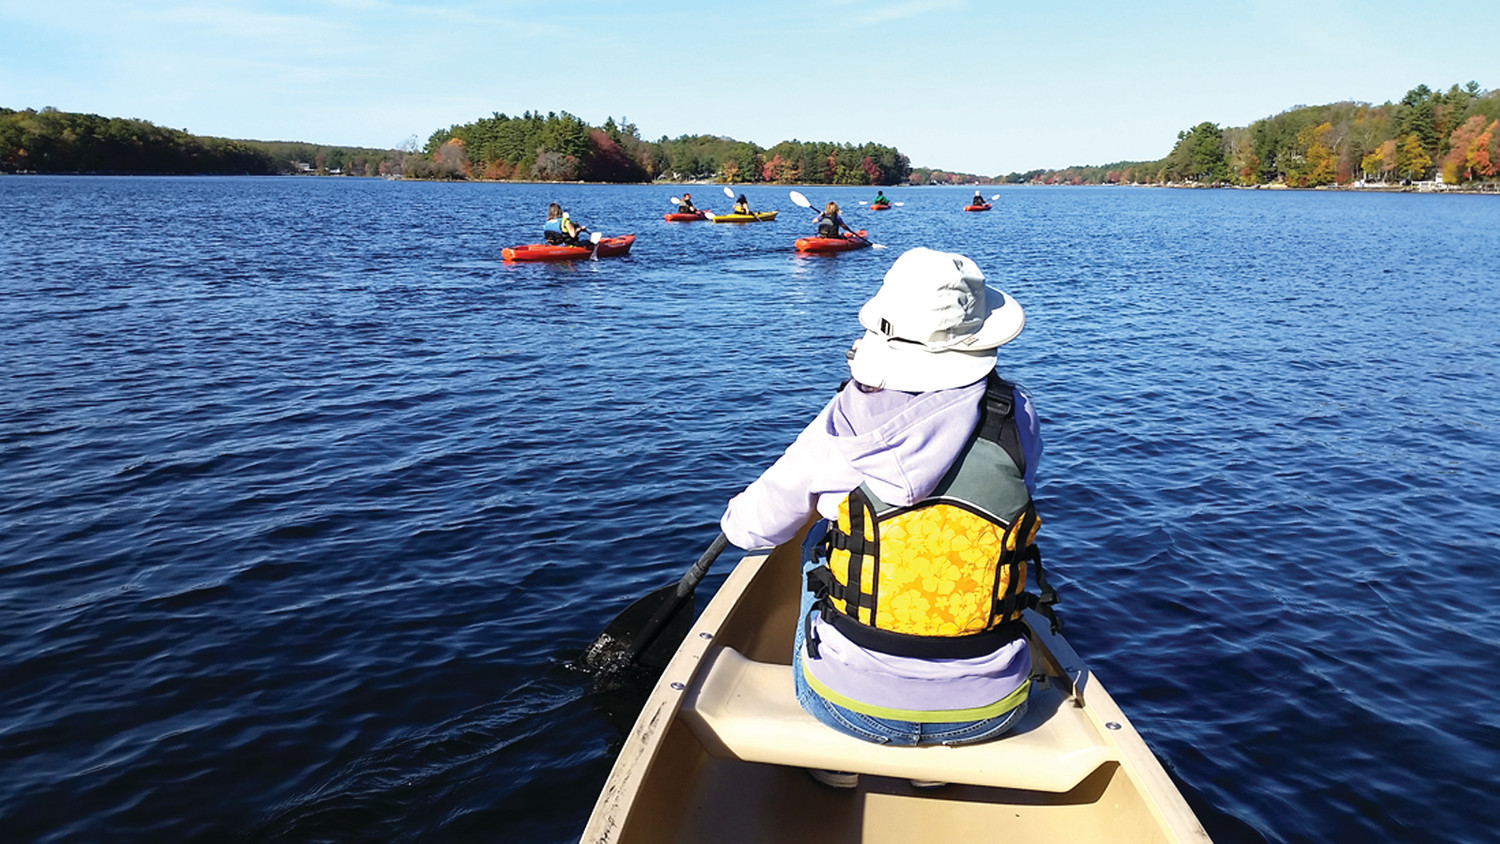 Women take to the waters as part of wilderness weekend.